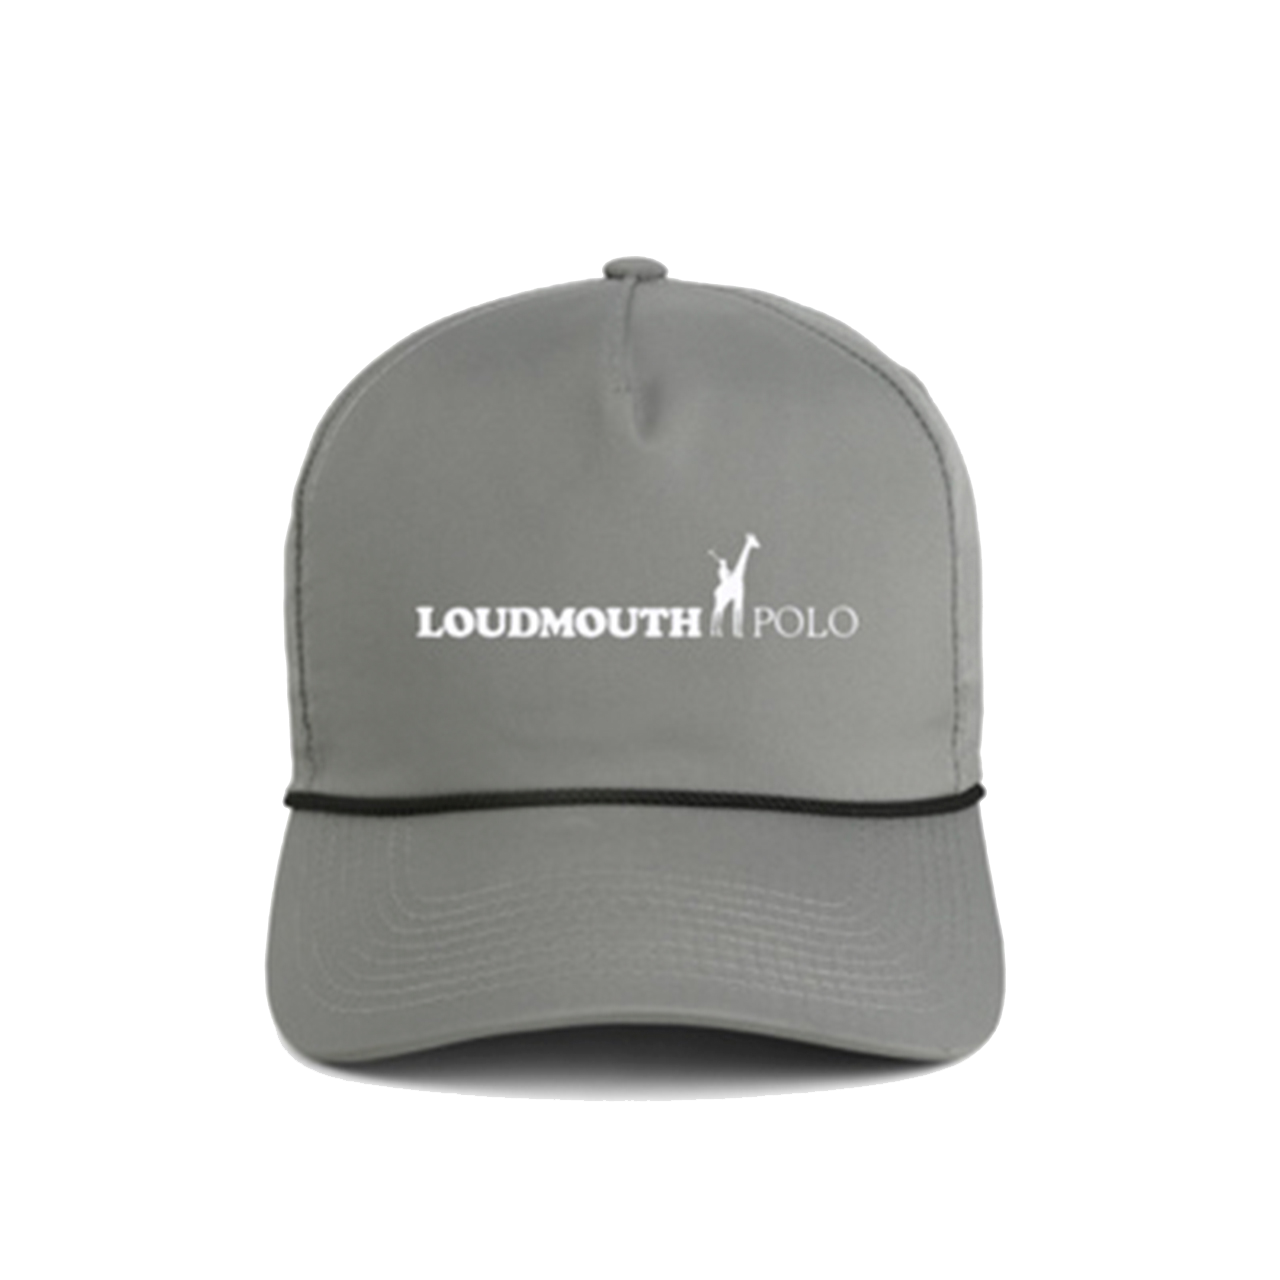 Loudmouth Polo Team Issued Hat x Imperial